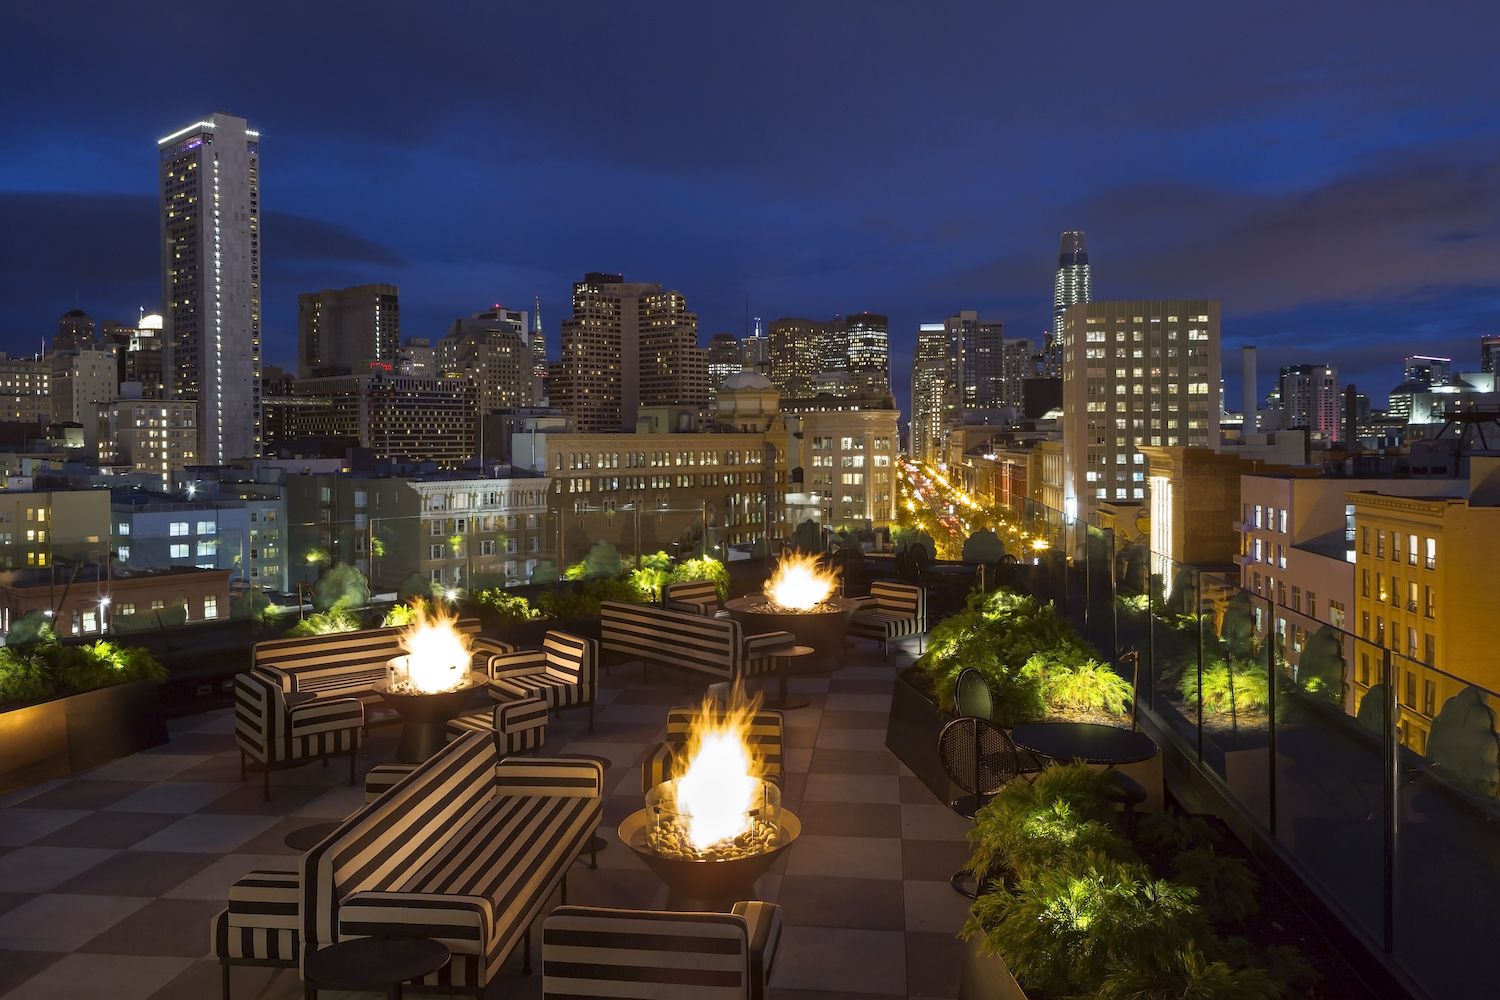 city skyline from a rooftop at night with tables and couch seating and fire pits.